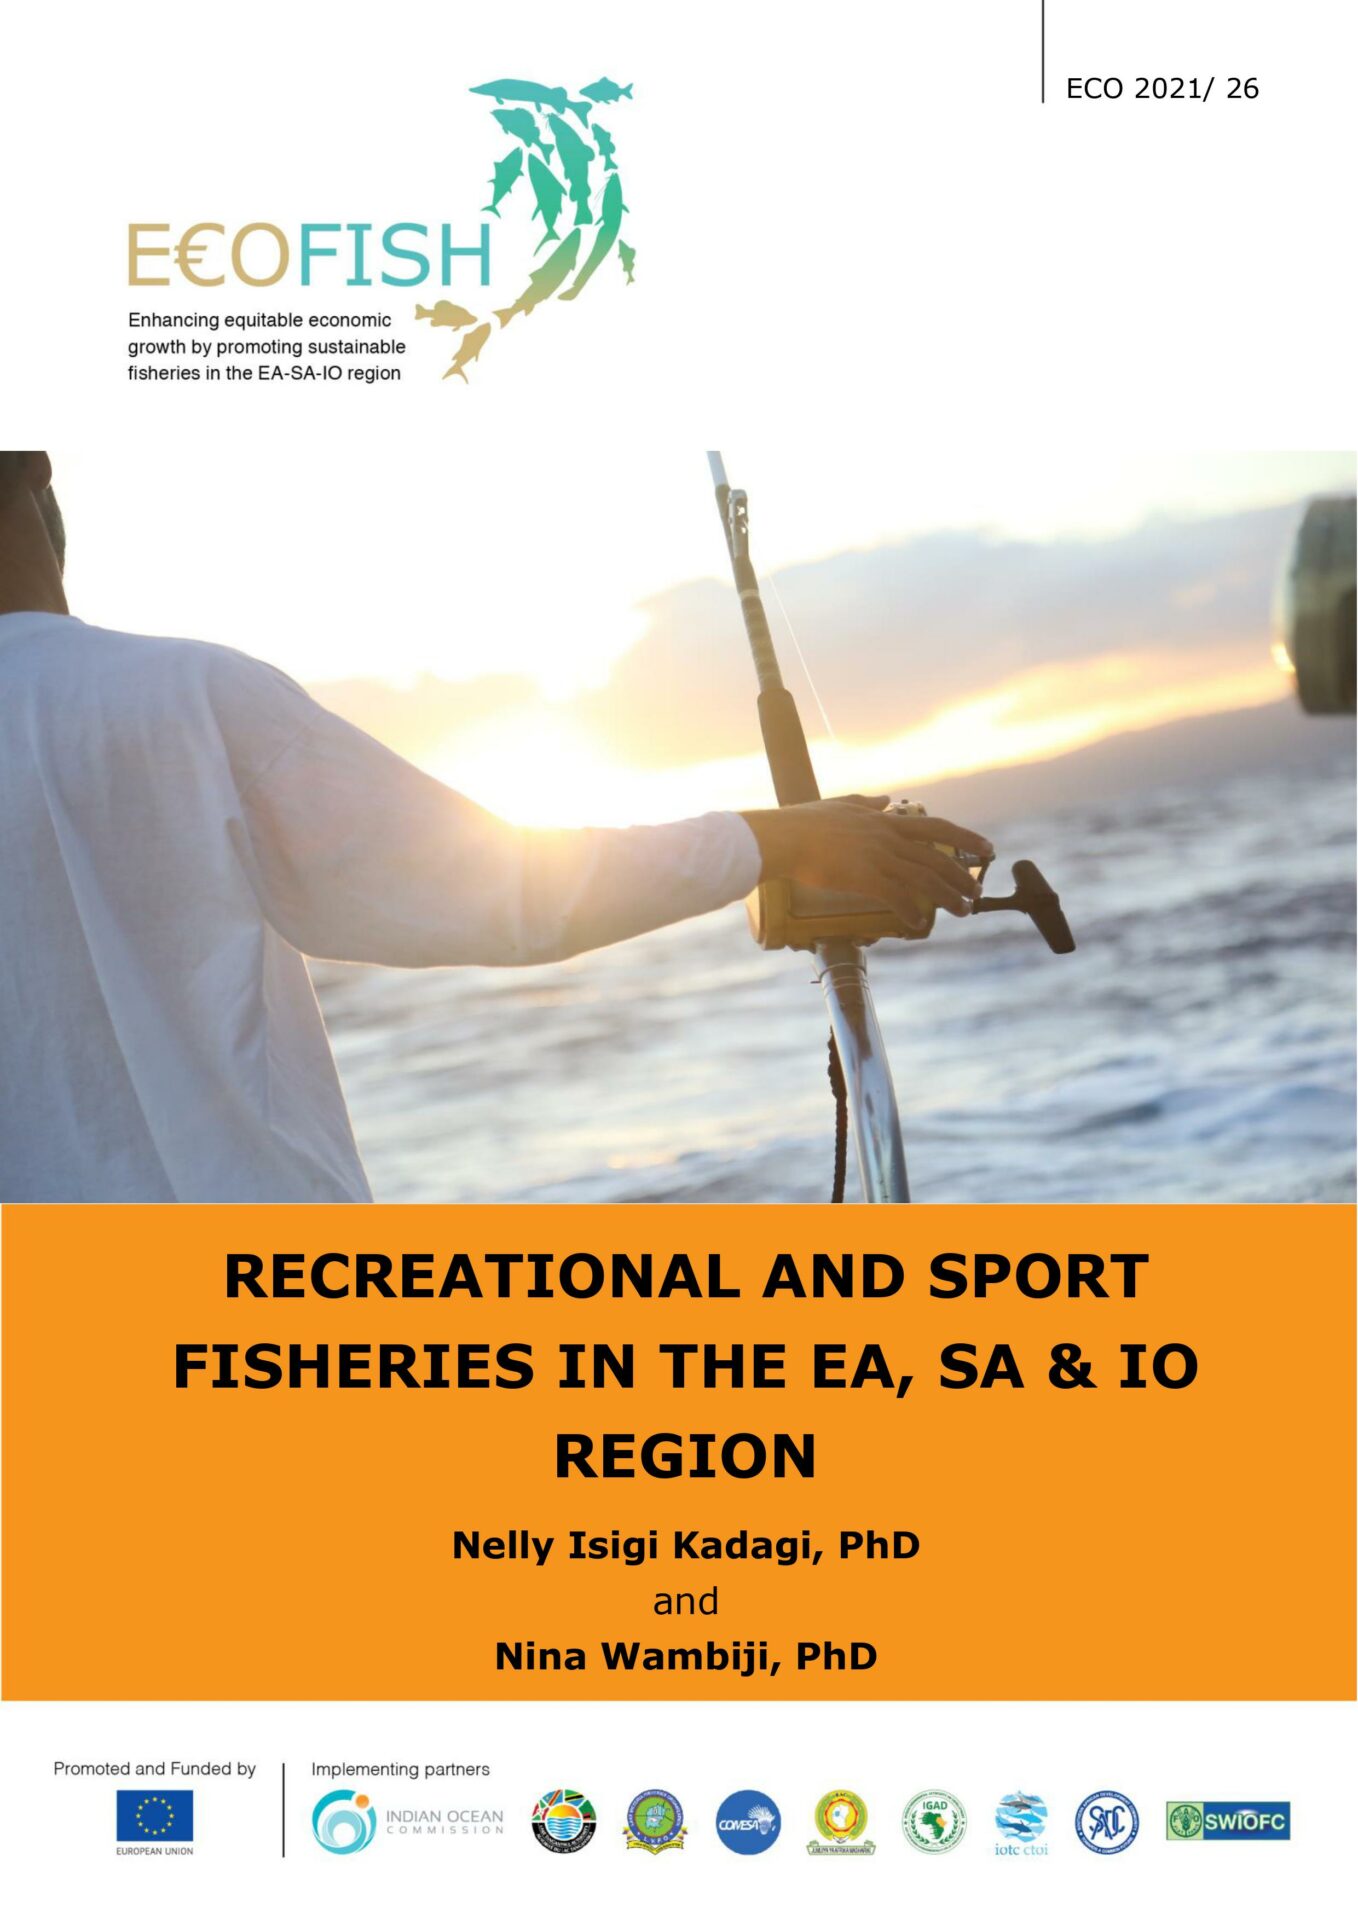 RECREATIONAL AND SPORT FISHERIES IN THE EA, SA & IO REGION